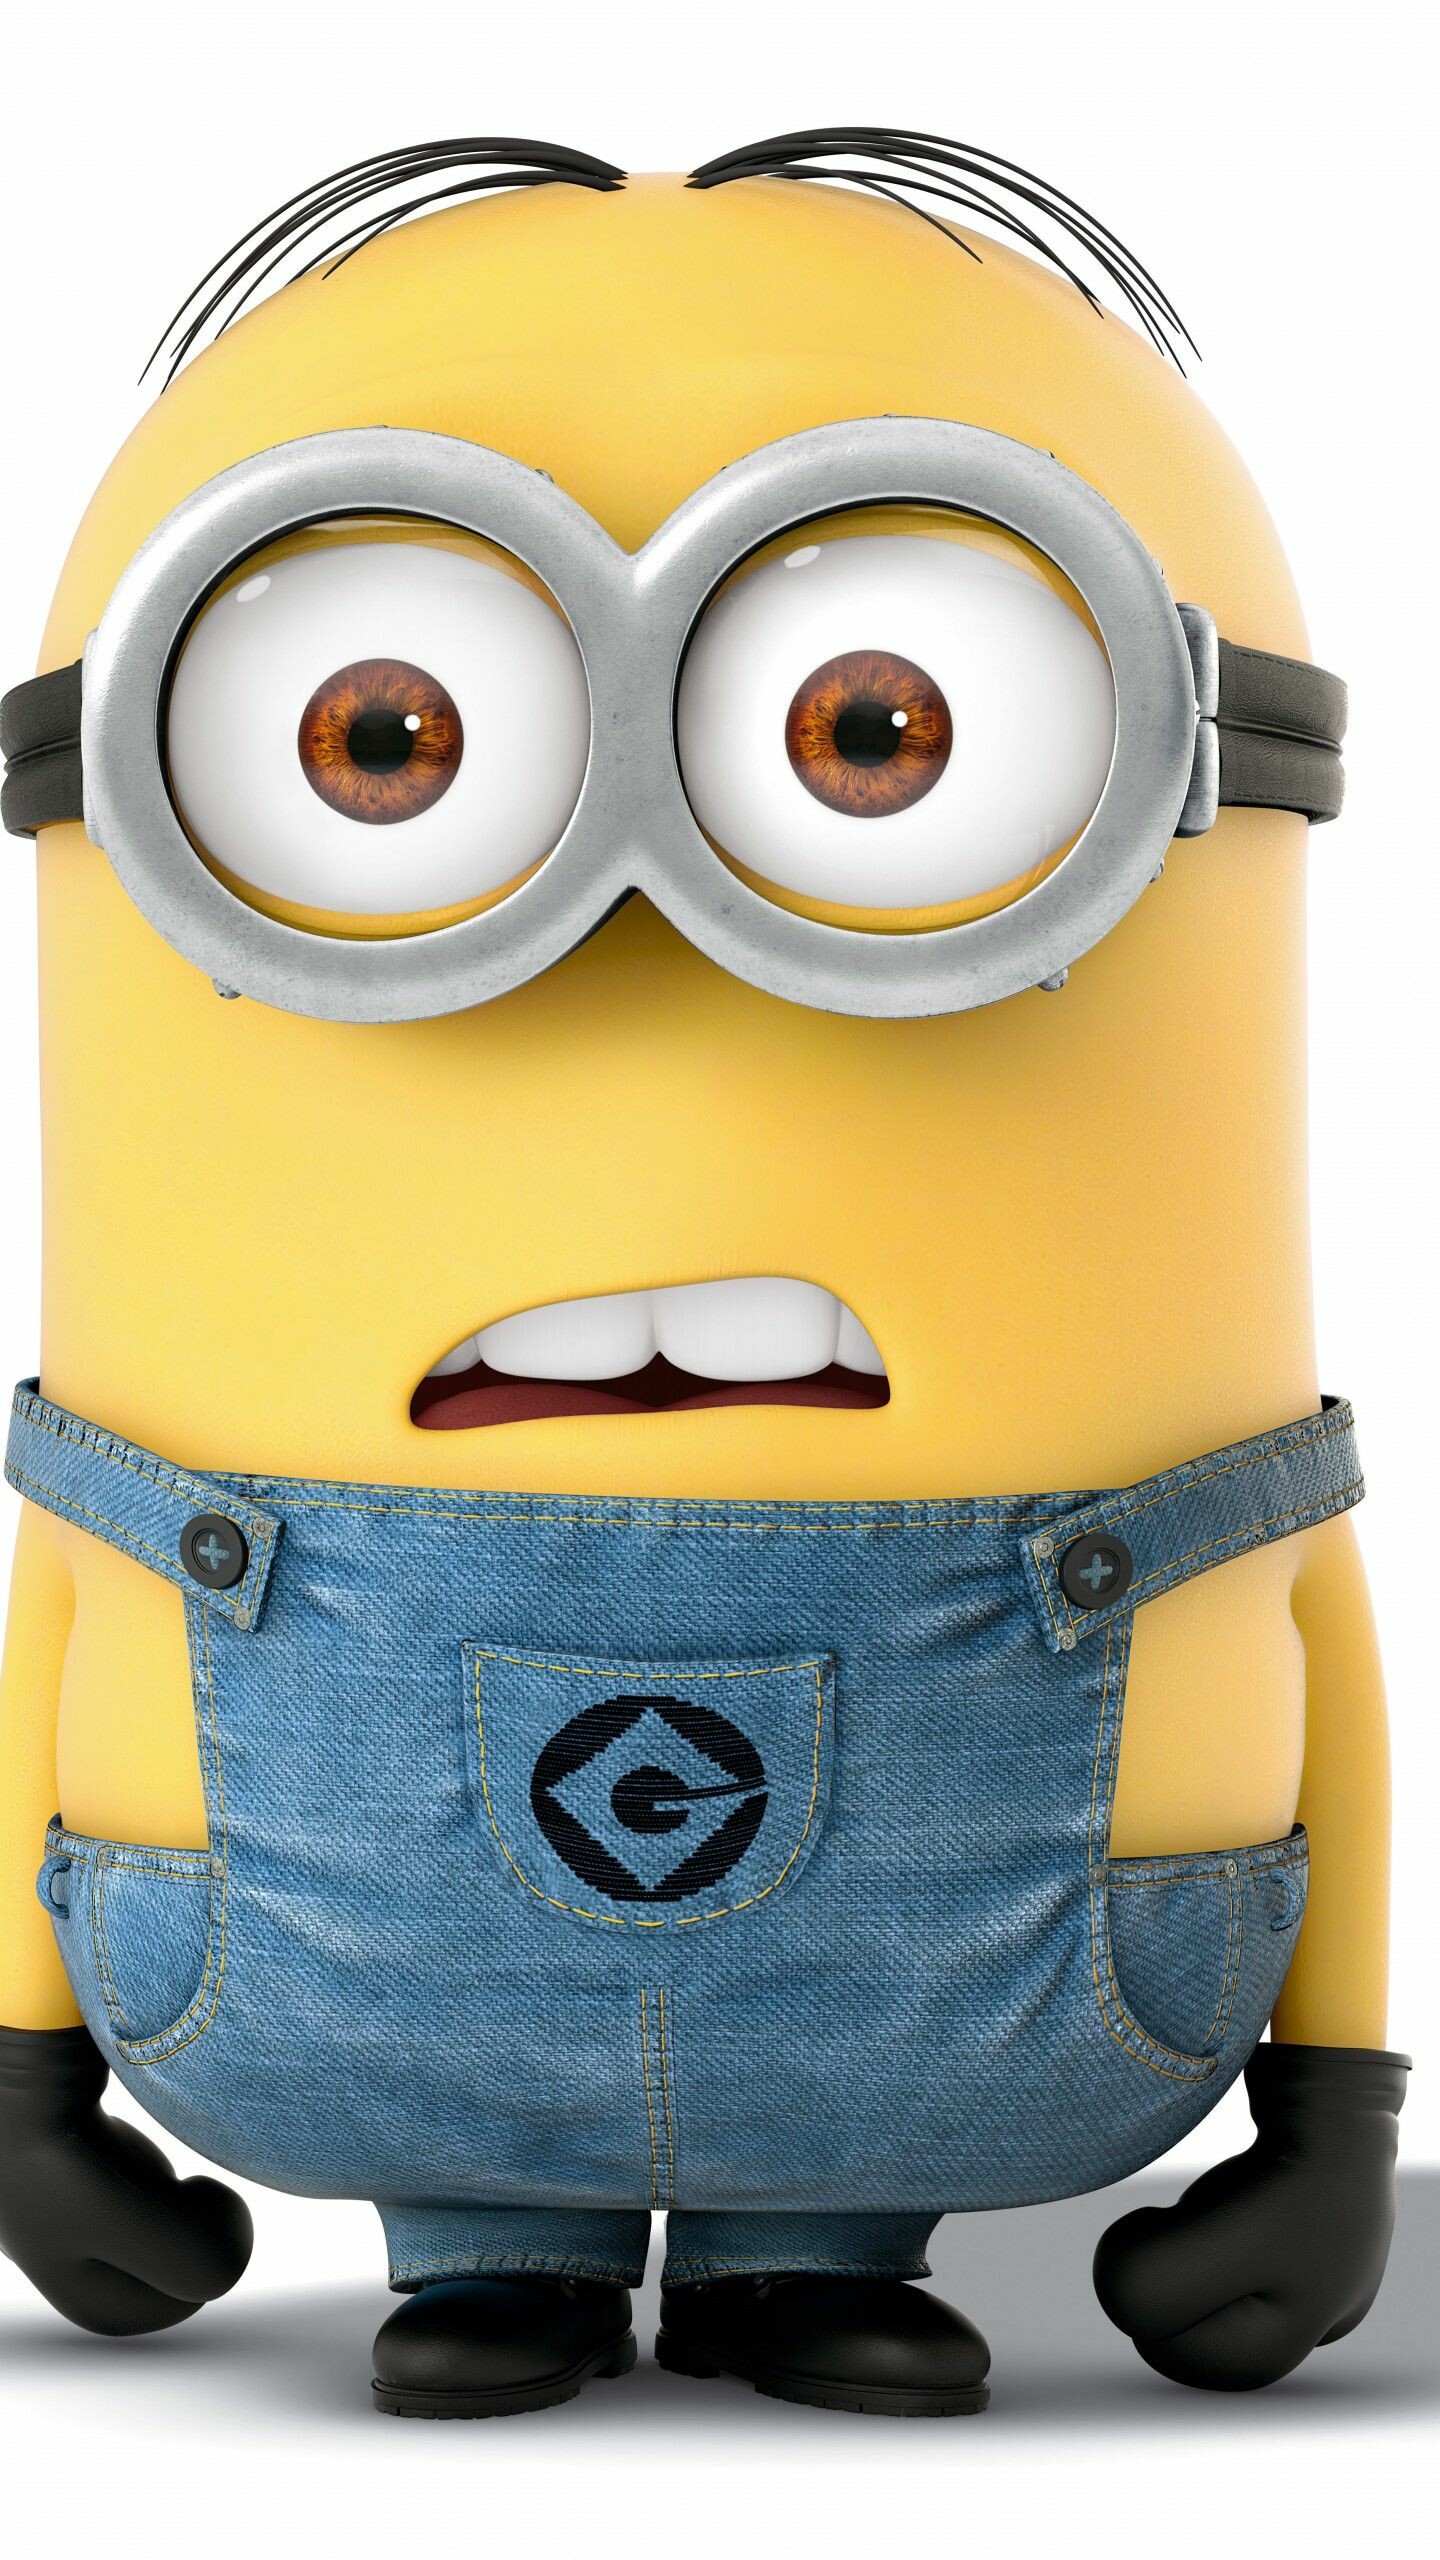 Despicable Me: Minion, small, yellow pill-like creature who have existed since the beginning of time. 1440x2560 HD Background.